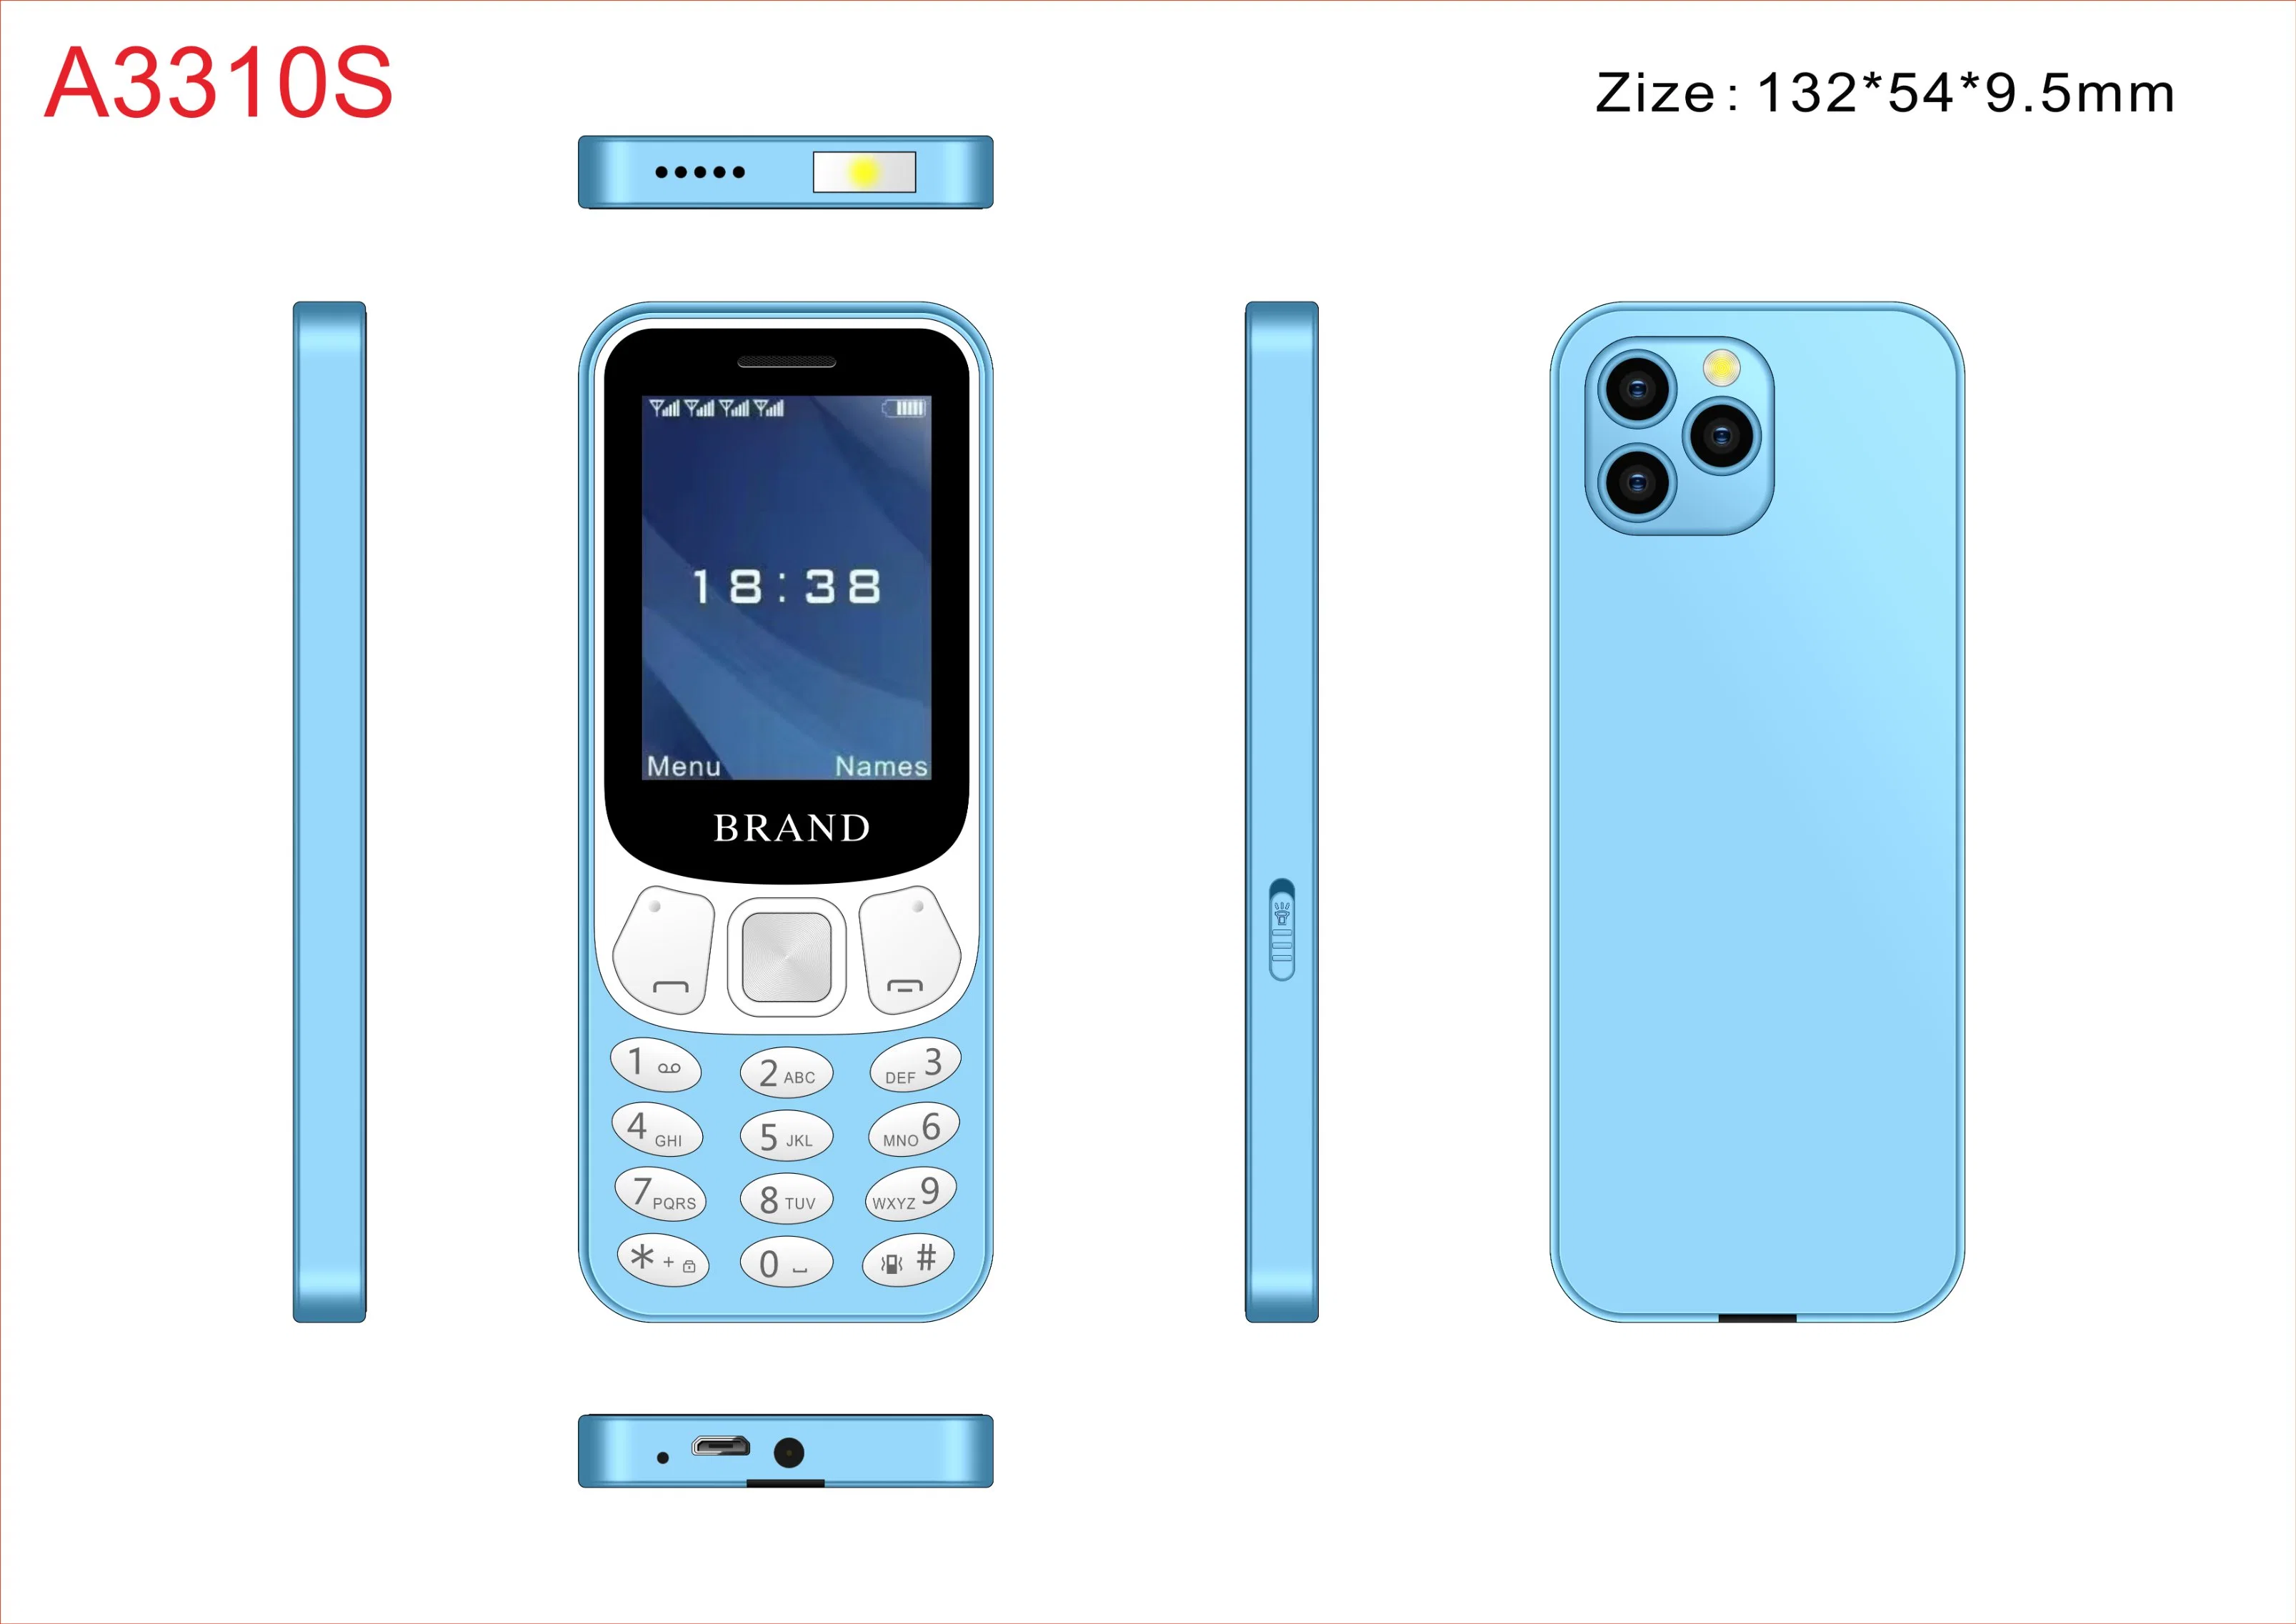 High Quality Mobile Phone with Large Battery Capacity From Shenzhen Factory Shop, 1.77inch 2g, Support OEM/ODM, Cell Phone, Feature Phone